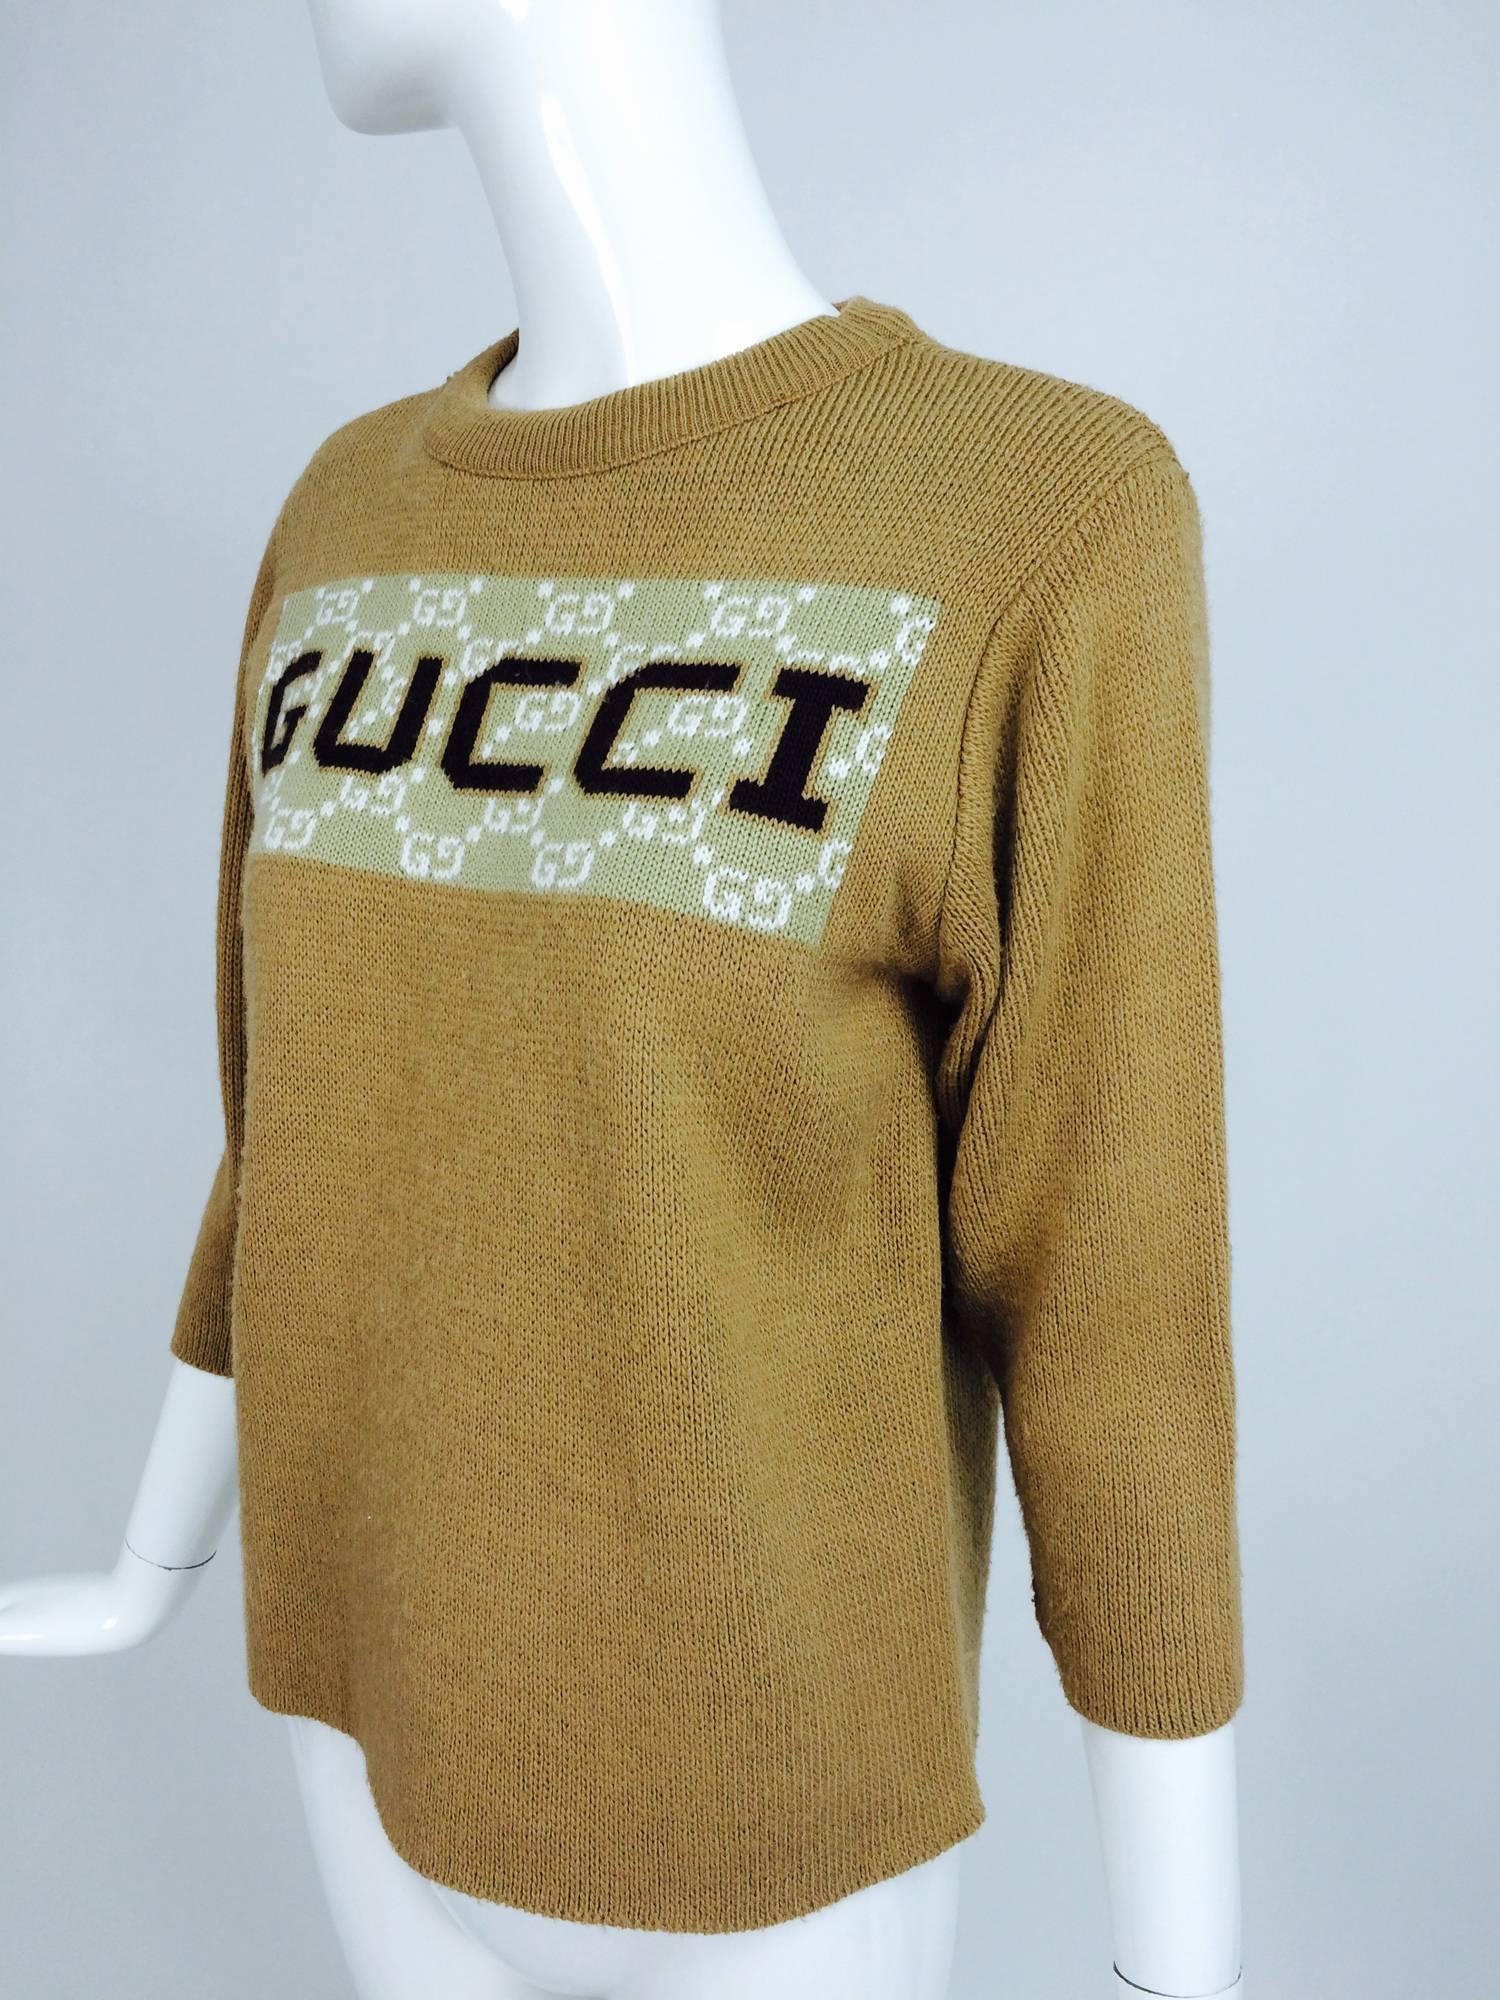 Vintage Gucci novelty logo sweater 1970s...Camel tan knit (acrylic) sweater with a large 